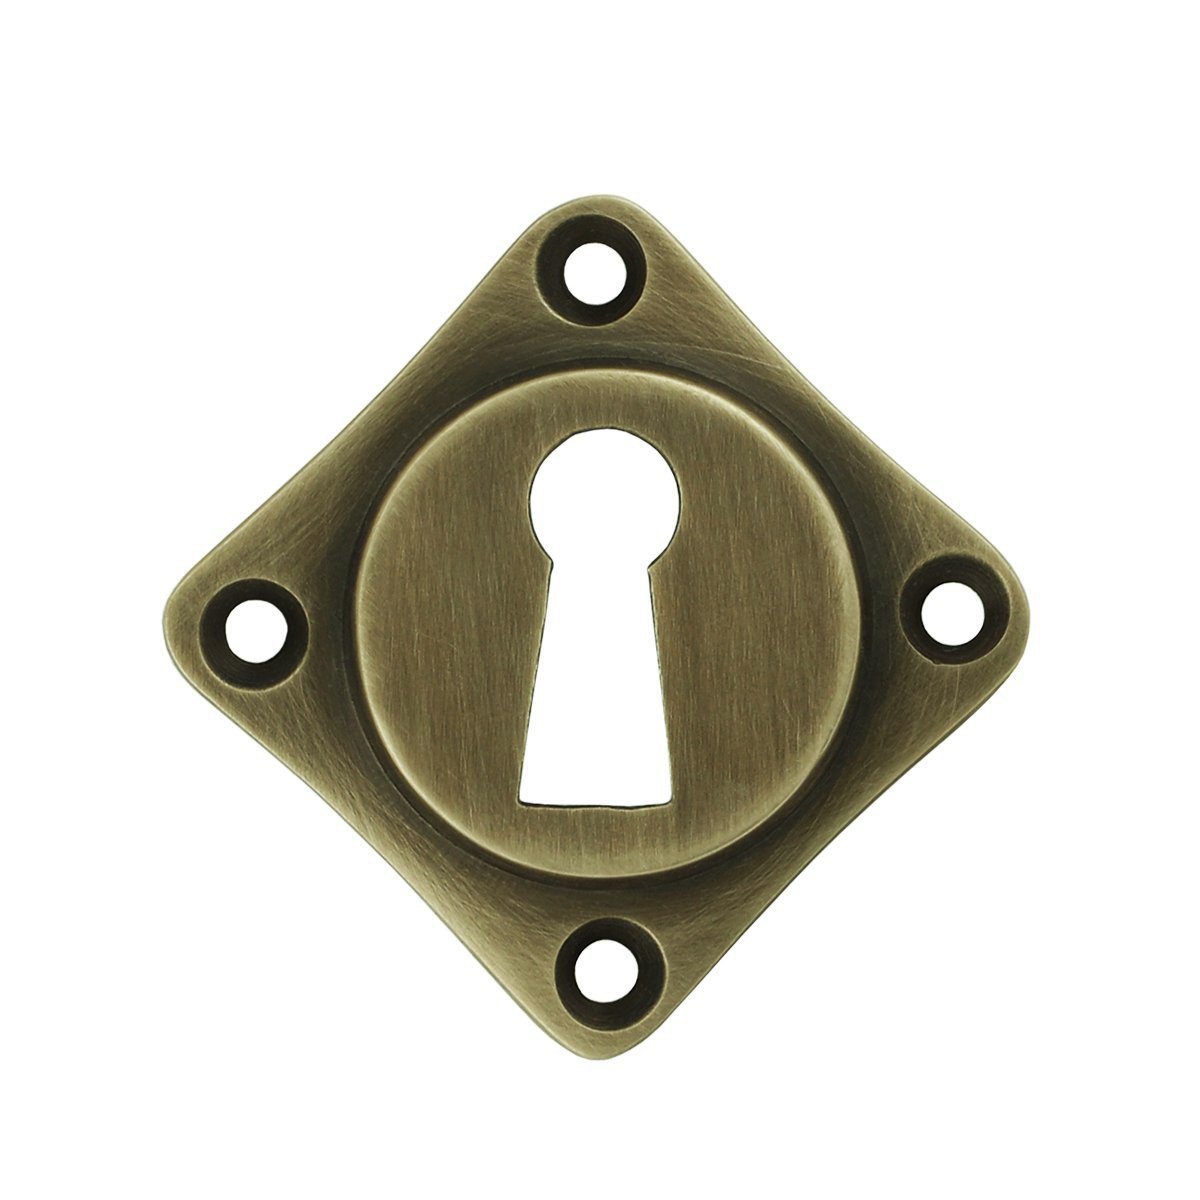 Key plate antique brass Gransee - 51 mm